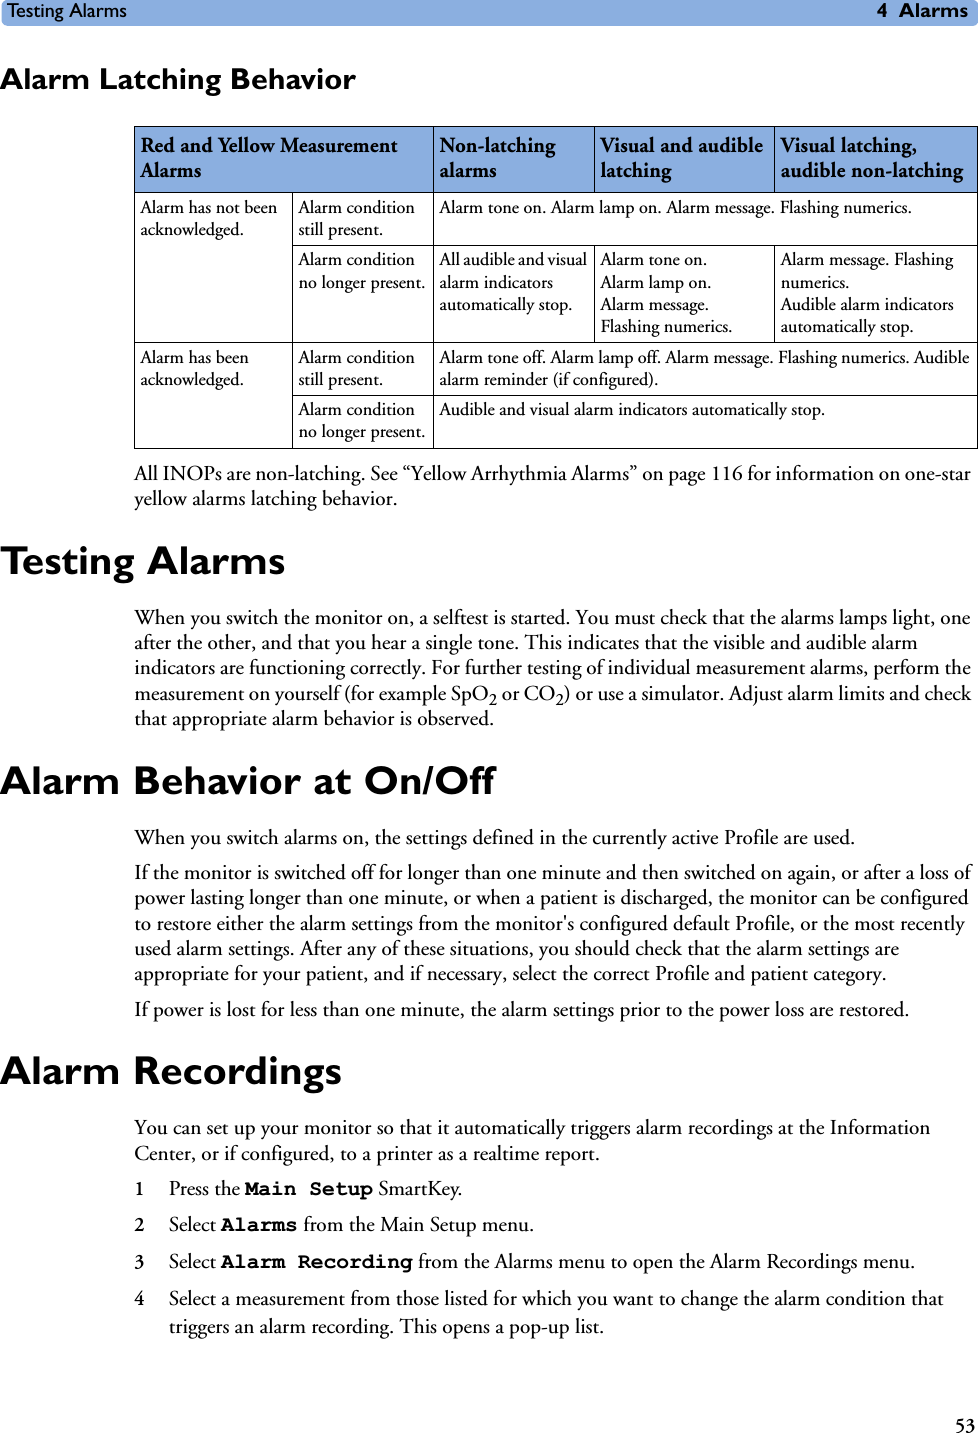 Testing Alarms 4Alarms53Alarm Latching BehaviorAll INOPs are non-latching. See “Yellow Arrhythmia Alarms” on page 116 for information on one-star yellow alarms latching behavior. Te s t i n g  A l a r m sWhen you switch the monitor on, a selftest is started. You must check that the alarms lamps light, one after the other, and that you hear a single tone. This indicates that the visible and audible alarm indicators are functioning correctly. For further testing of individual measurement alarms, perform the measurement on yourself (for example SpO2 or CO2) or use a simulator. Adjust alarm limits and check that appropriate alarm behavior is observed.Alarm Behavior at On/OffWhen you switch alarms on, the settings defined in the currently active Profile are used. If the monitor is switched off for longer than one minute and then switched on again, or after a loss of power lasting longer than one minute, or when a patient is discharged, the monitor can be configured to restore either the alarm settings from the monitor&apos;s configured default Profile, or the most recently used alarm settings. After any of these situations, you should check that the alarm settings are appropriate for your patient, and if necessary, select the correct Profile and patient category. If power is lost for less than one minute, the alarm settings prior to the power loss are restored.Alarm RecordingsYou can set up your monitor so that it automatically triggers alarm recordings at the Information Center, or if configured, to a printer as a realtime report.1Press the Main Setup SmartKey.2Select Alarms from the Main Setup menu.3Select Alarm Recording from the Alarms menu to open the Alarm Recordings menu.4Select a measurement from those listed for which you want to change the alarm condition that triggers an alarm recording. This opens a pop-up list.Red and Yellow Measurement AlarmsNon-latching alarmsVisual and audible latchingVisual latching, audible non-latchingAlarm has not been acknowledged.Alarm condition still present.Alarm tone on. Alarm lamp on. Alarm message. Flashing numerics.Alarm condition no longer present.All audible and visual alarm indicators automatically stop.Alarm tone on.Alarm lamp on. Alarm message. Flashing numerics. Alarm message. Flashing numerics.Audible alarm indicators automatically stop. Alarm has been acknowledged.Alarm condition still present.Alarm tone off. Alarm lamp off. Alarm message. Flashing numerics. Audible alarm reminder (if configured). Alarm condition no longer present.Audible and visual alarm indicators automatically stop.